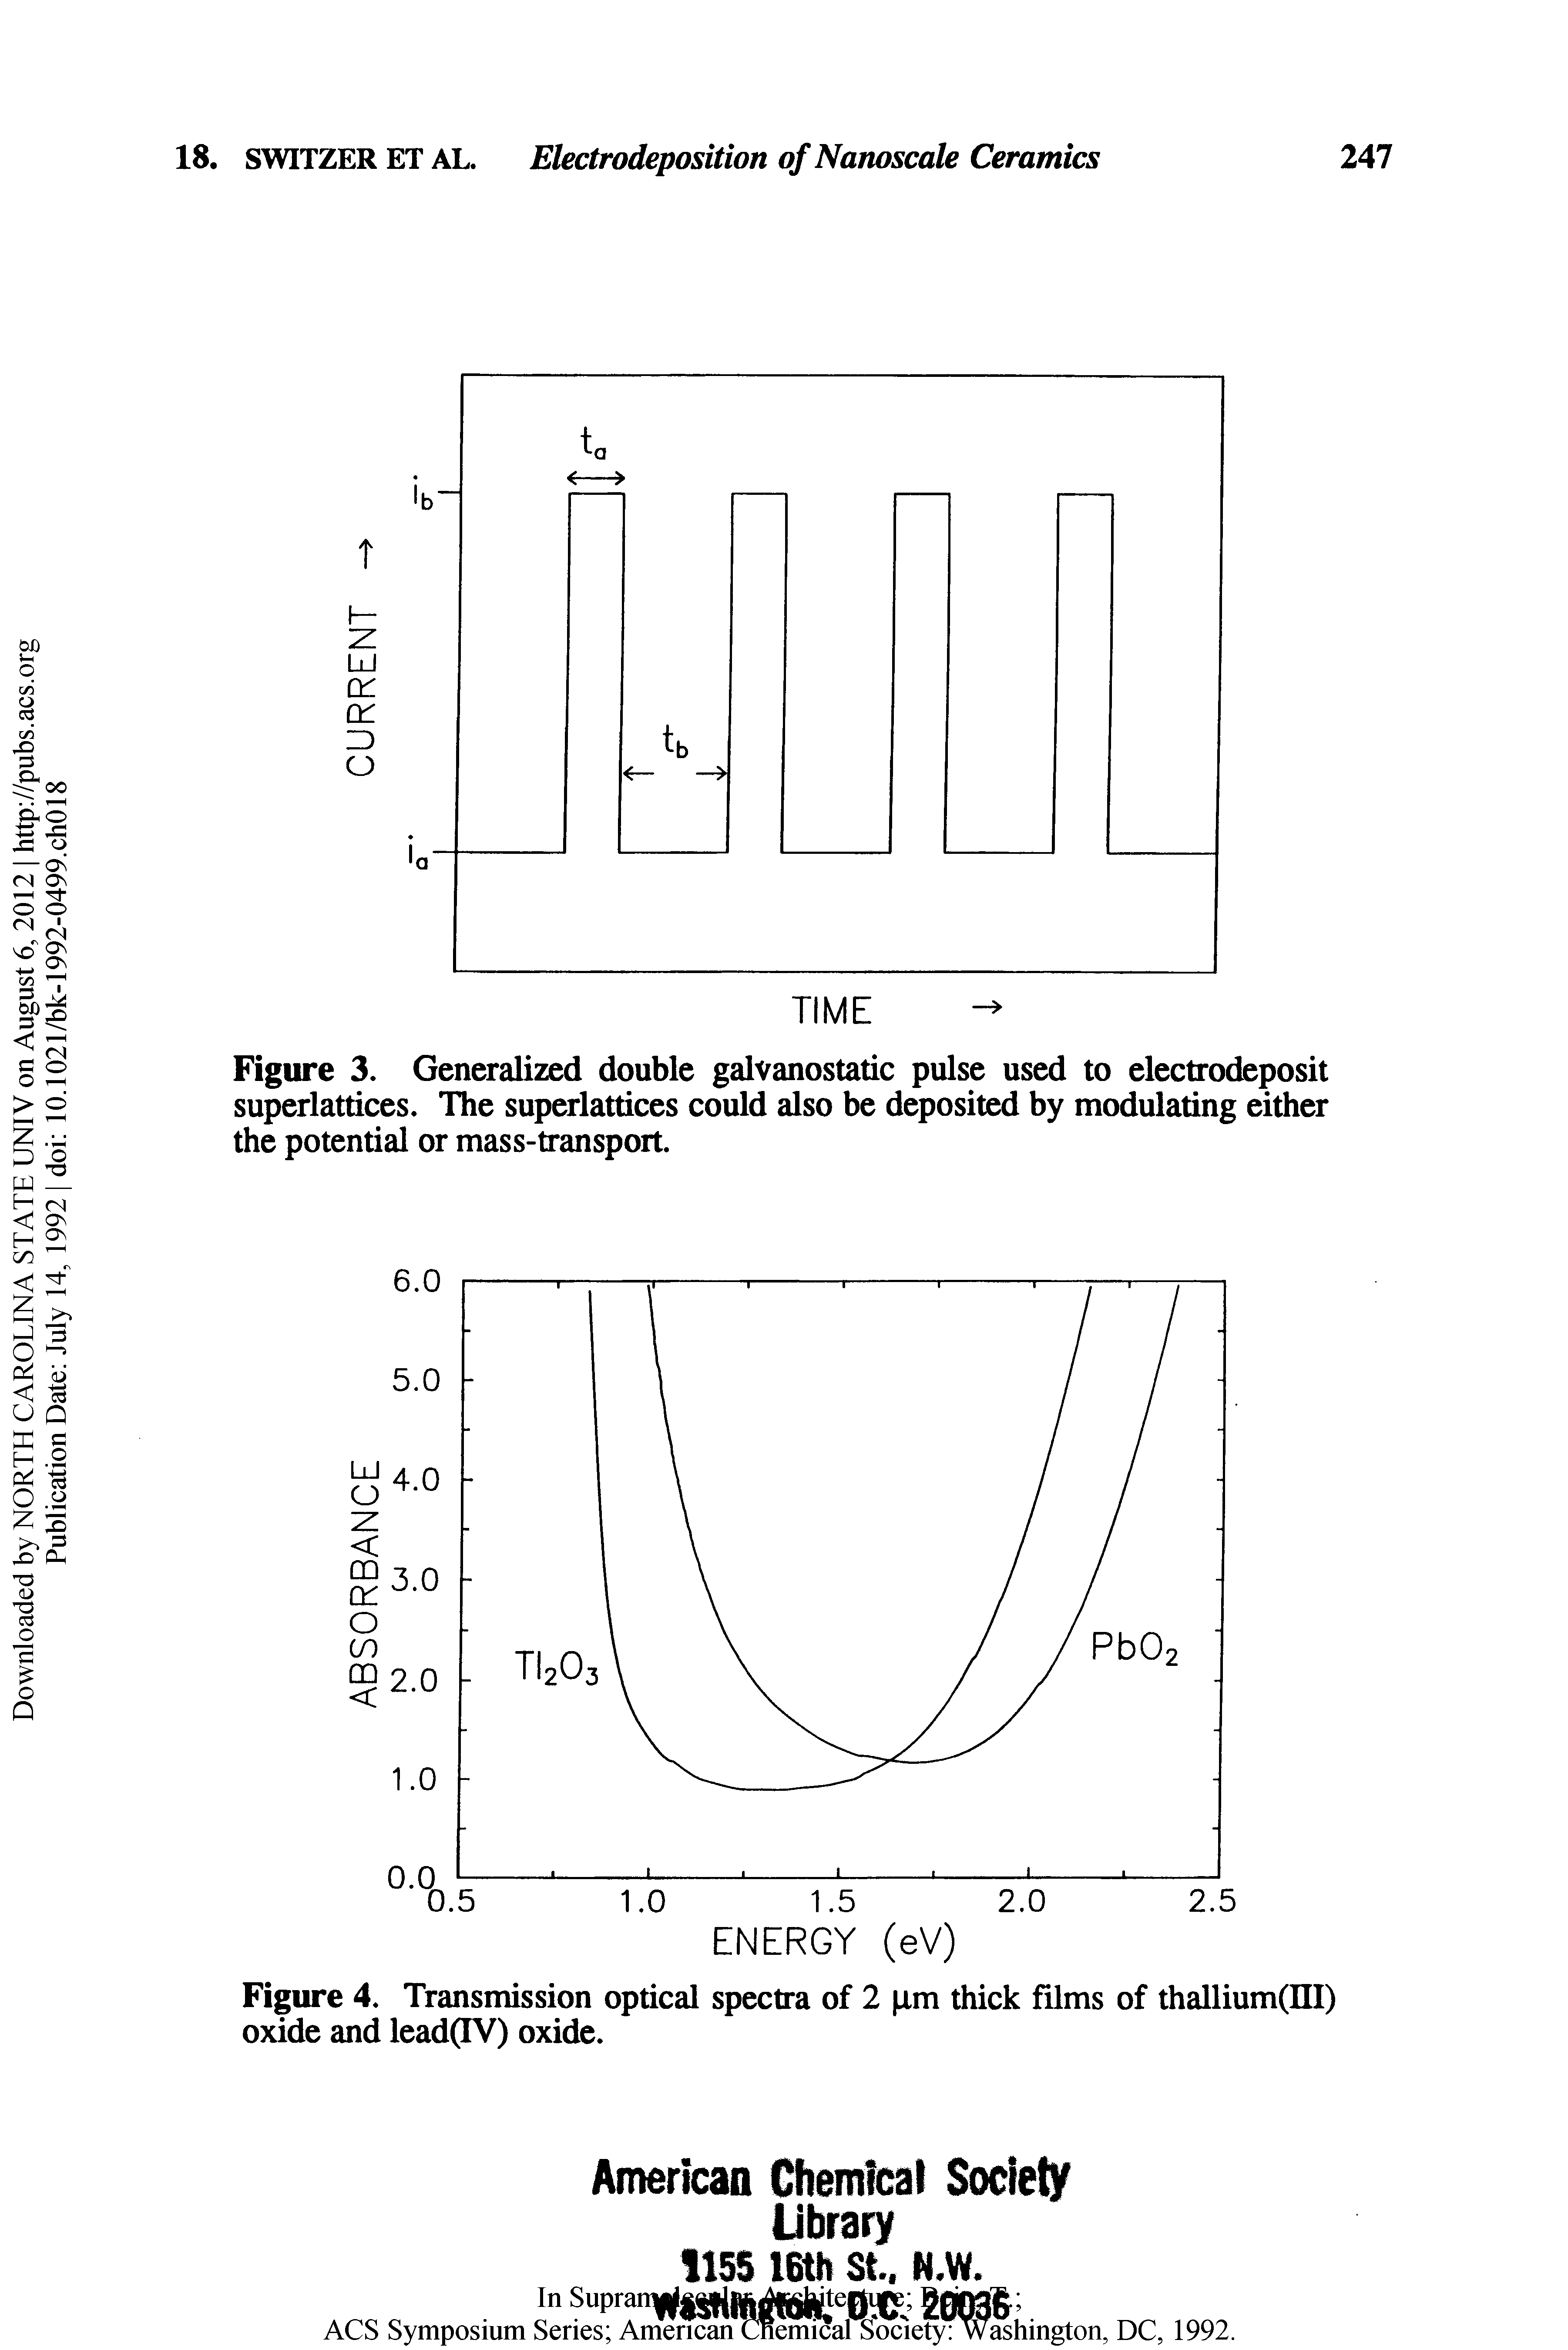 Figure 3. Generalized double galvanostatic pulse used to electrodeposit superlattices. The superlattices could also be deposited by modulating either the potential or mass-transport.